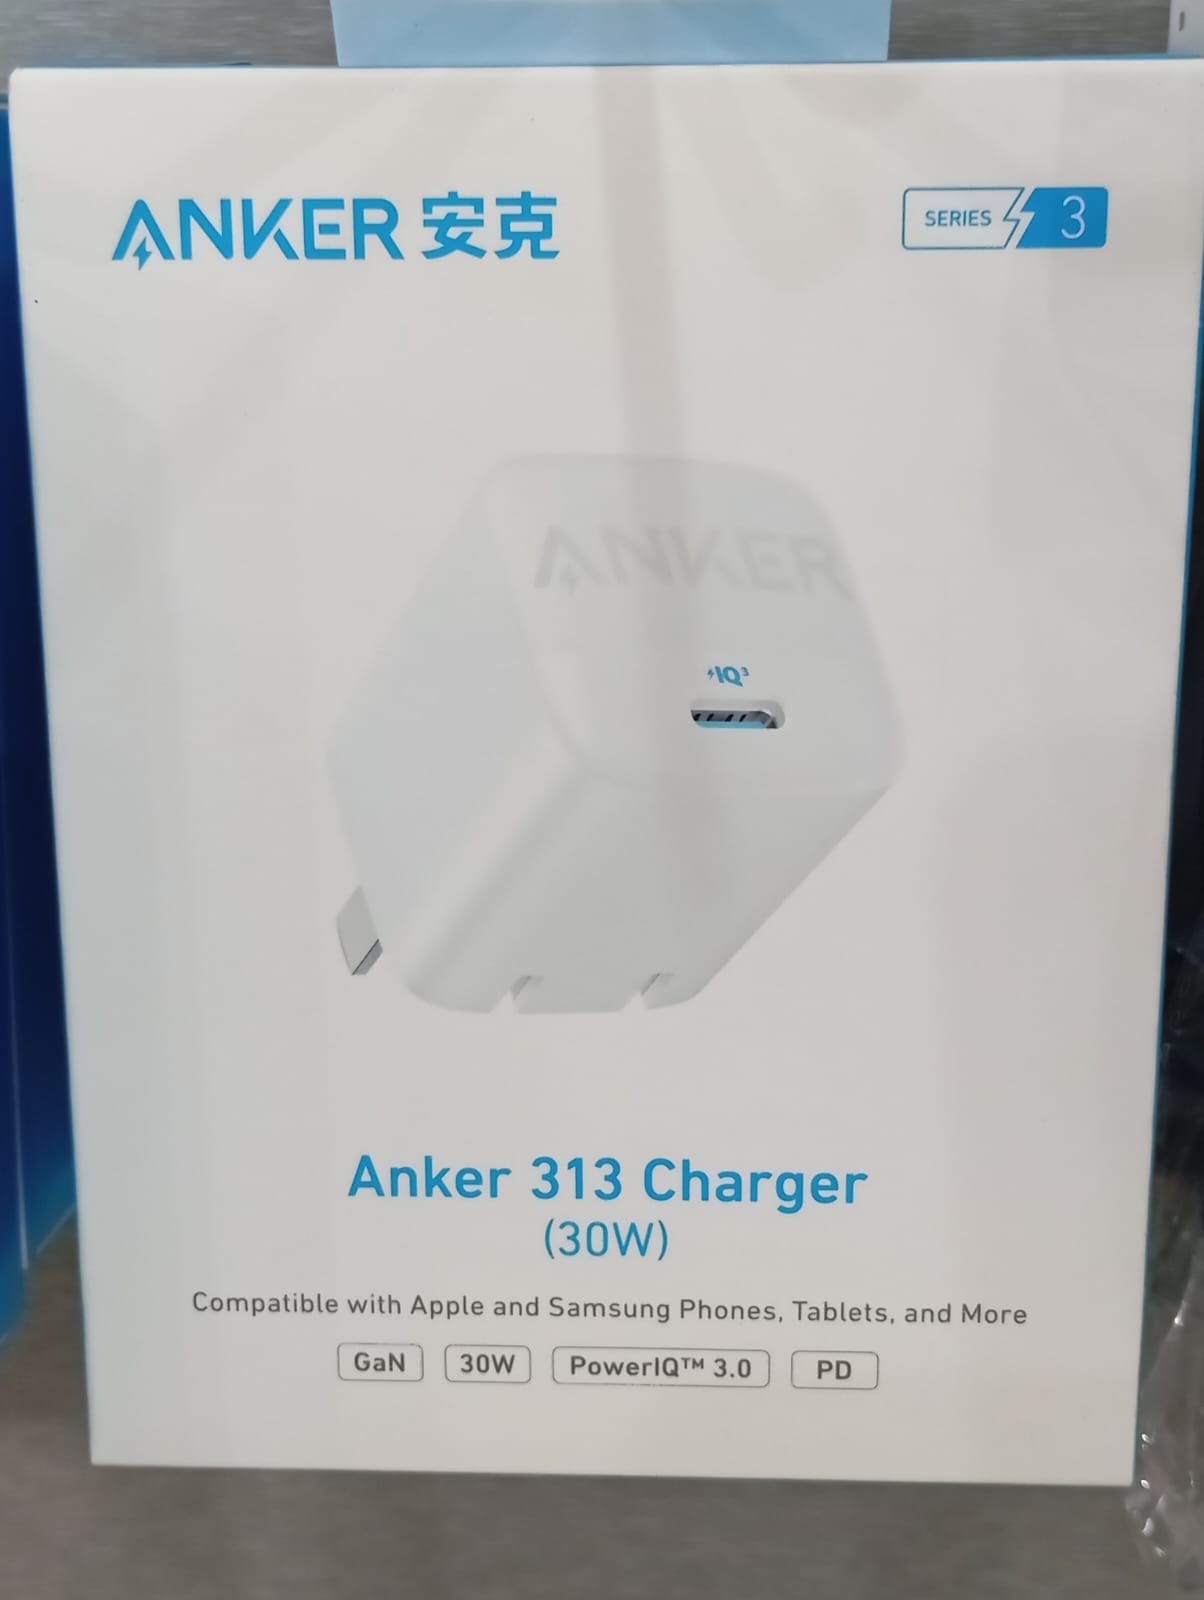 ANKER 313 CHARGER (30W)